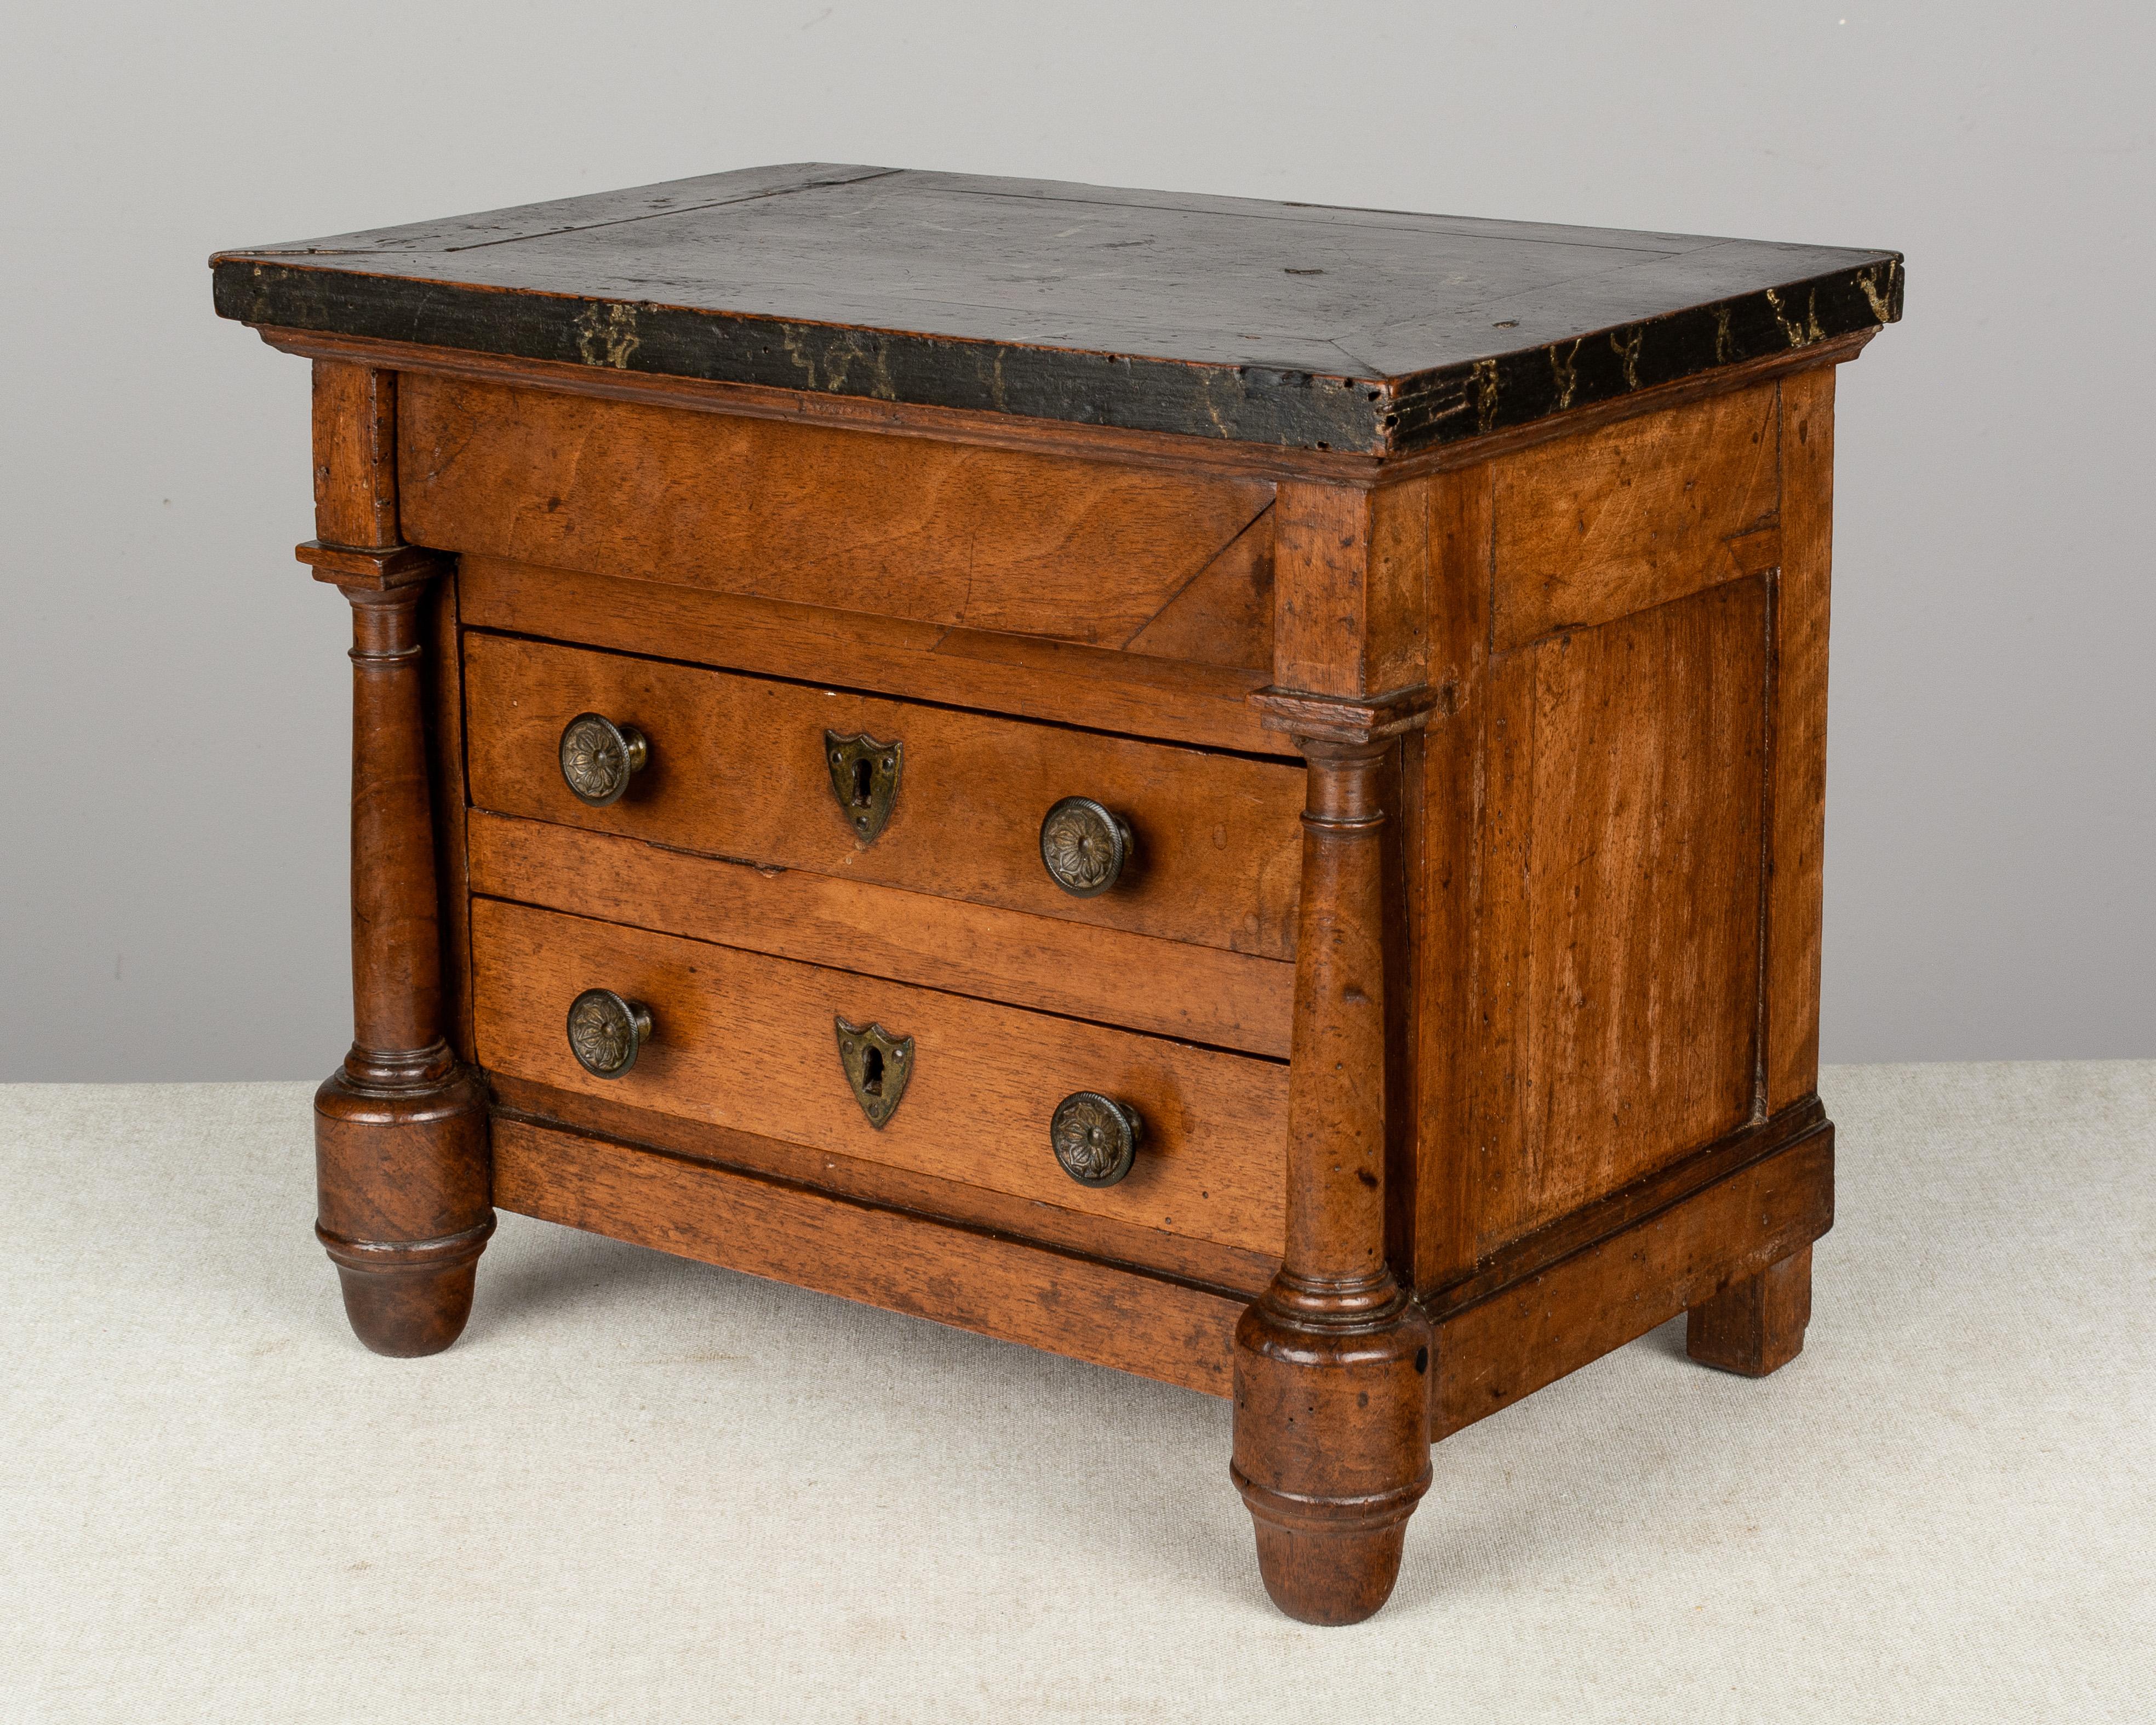 An early 19th century French Empire miniature sample commode made of solid walnut with three dovetailed drawers, turned columns and a top that is faux painted to look like veined black marble. Original brass knobs and escutcheons. Locks were never